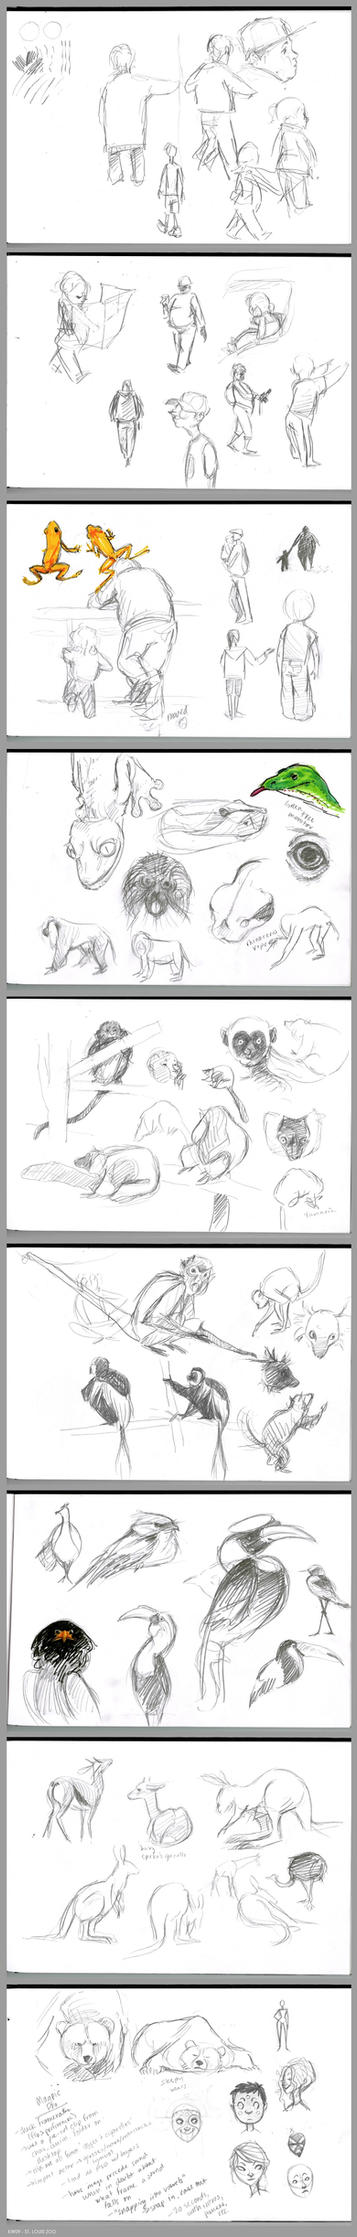 St. Louis Zoo sketches by katie8787 on DeviantArt